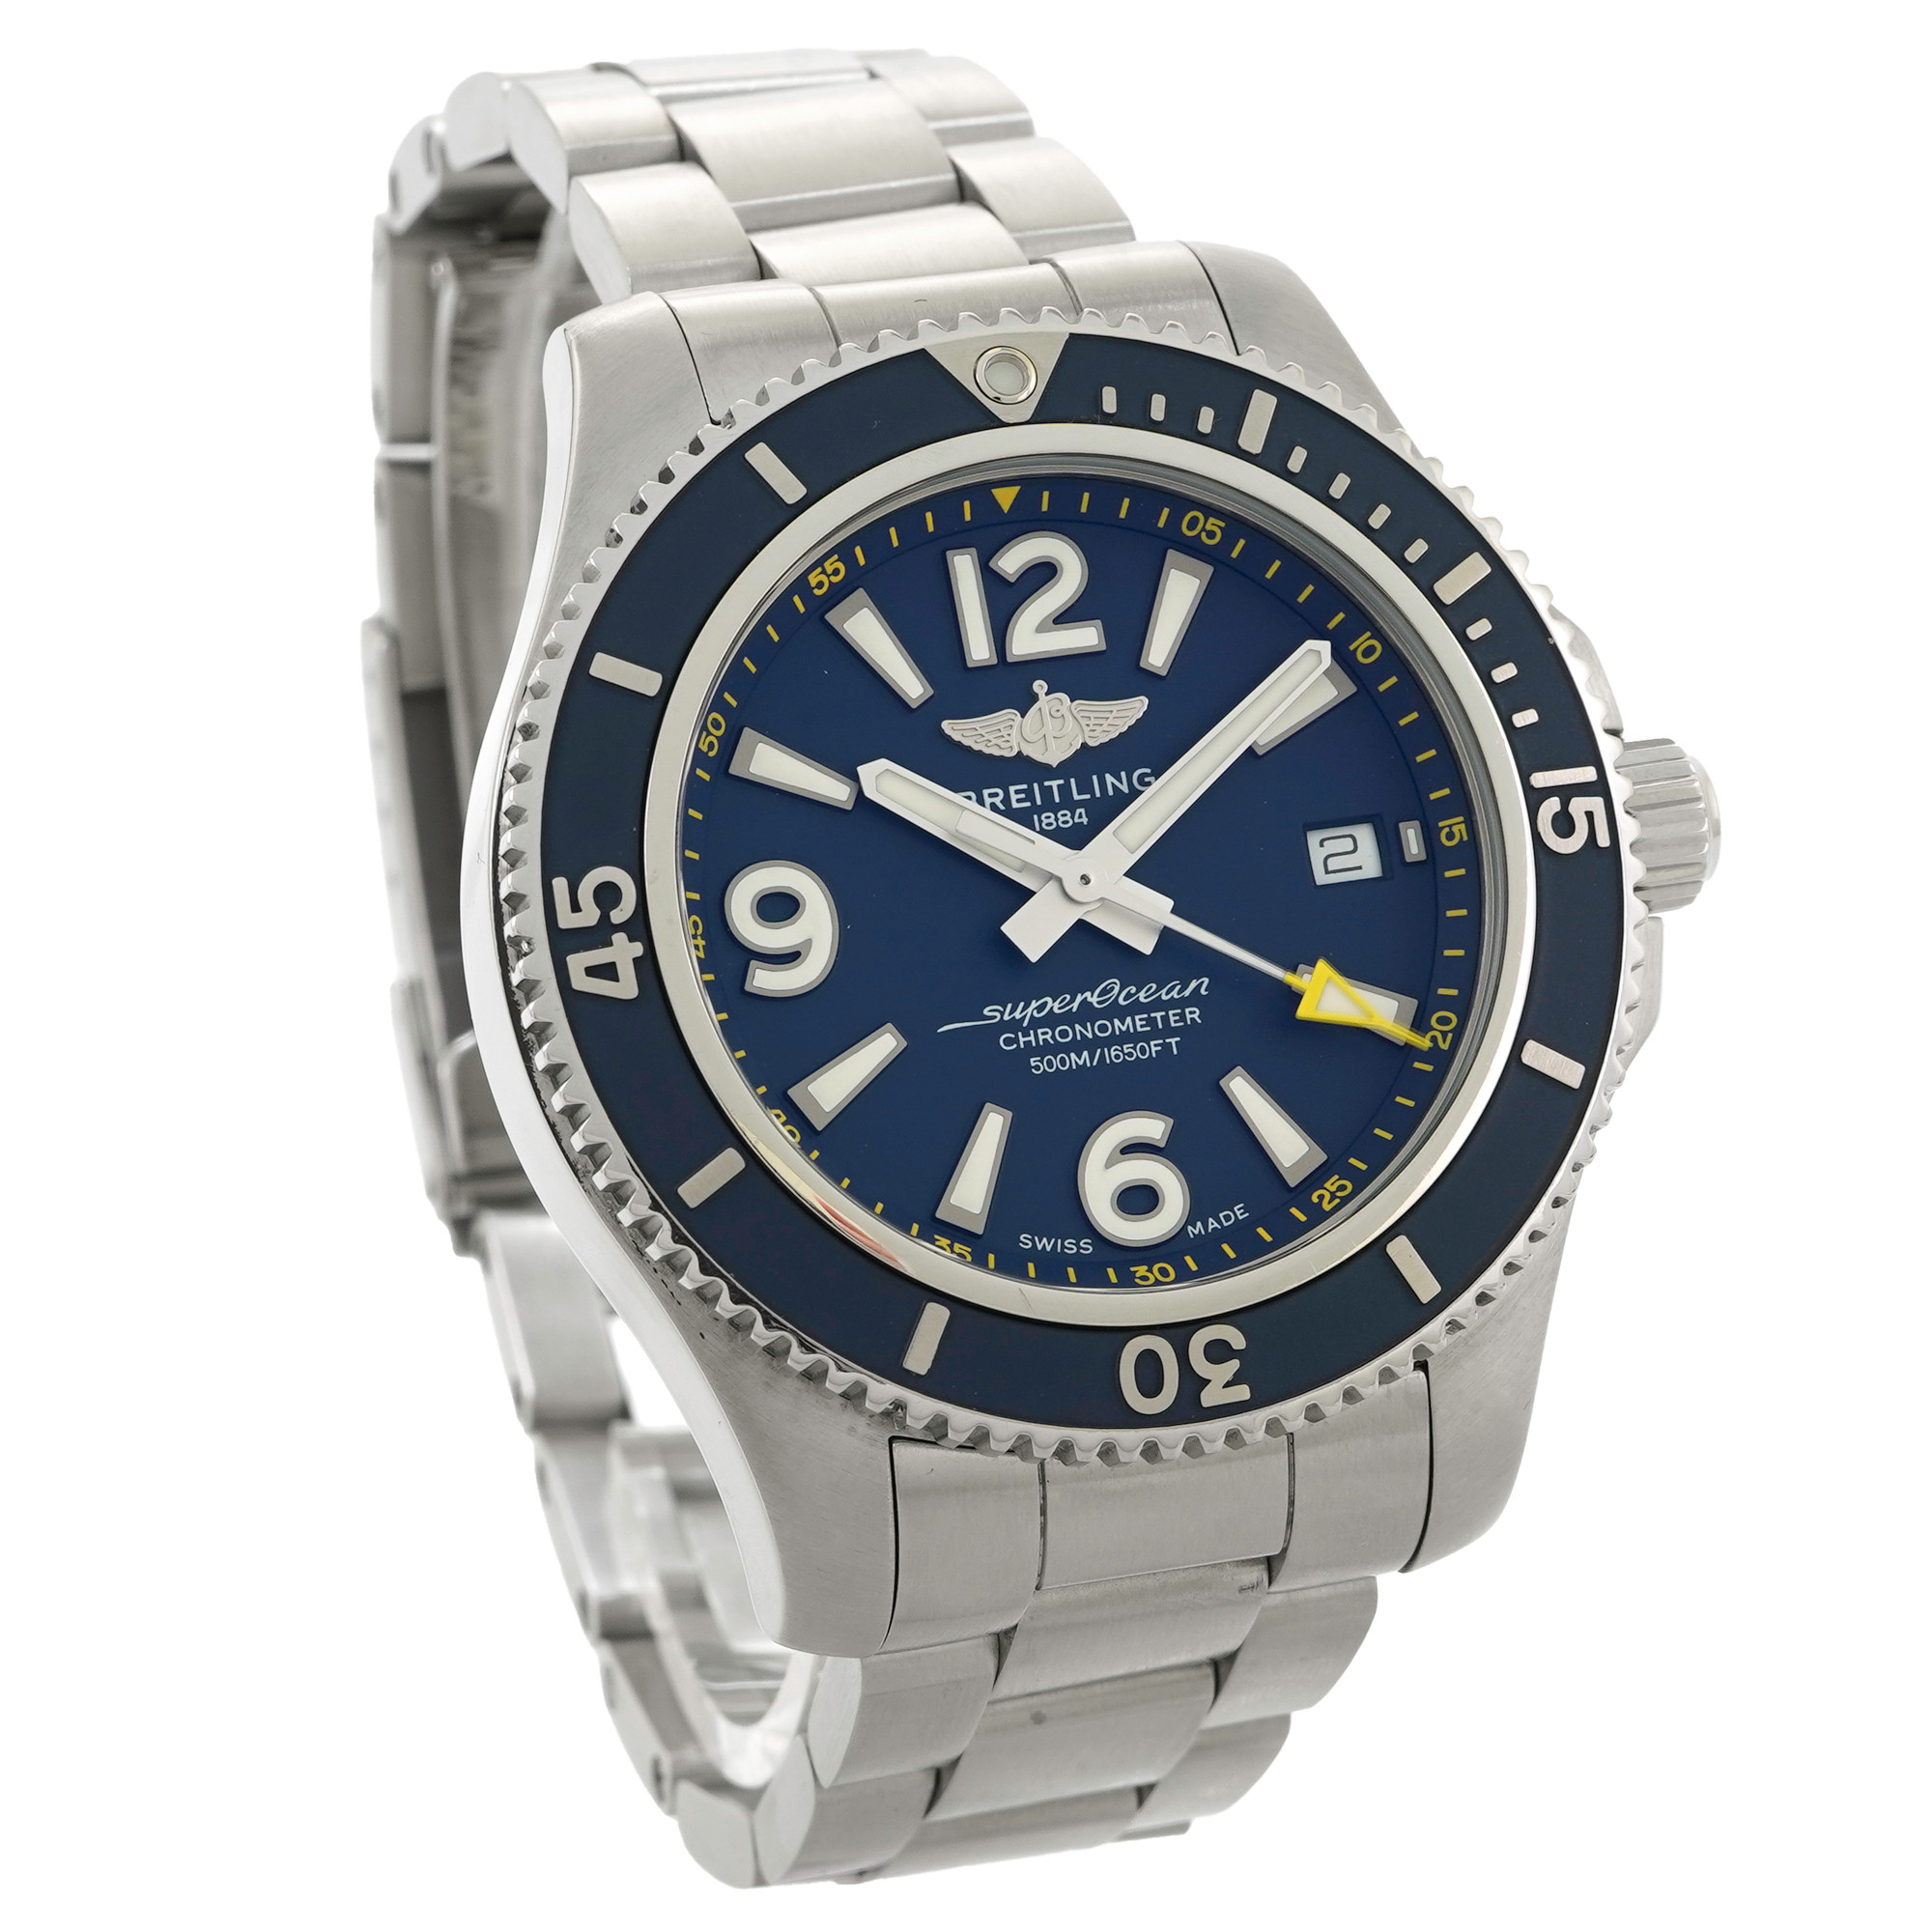 Breitling SuperOcean 42 Japan Limited Edition A17366 *Blue Dial* - Inventory 5539